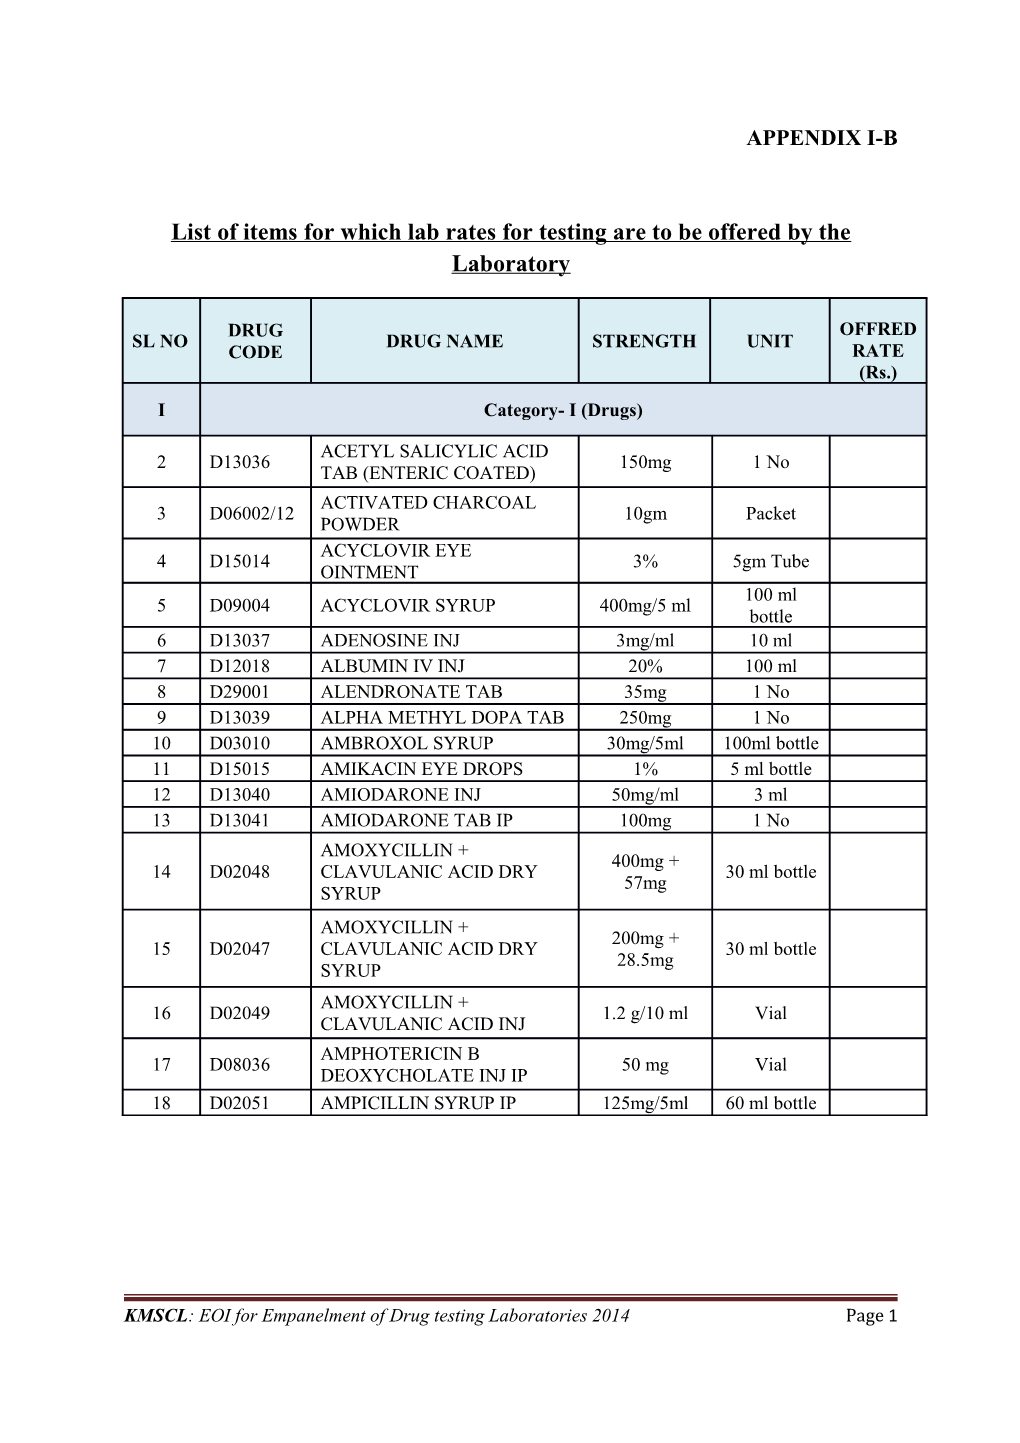 List of Items for Which Lab Rates for Testing Are to Be Offered by the Laboratory